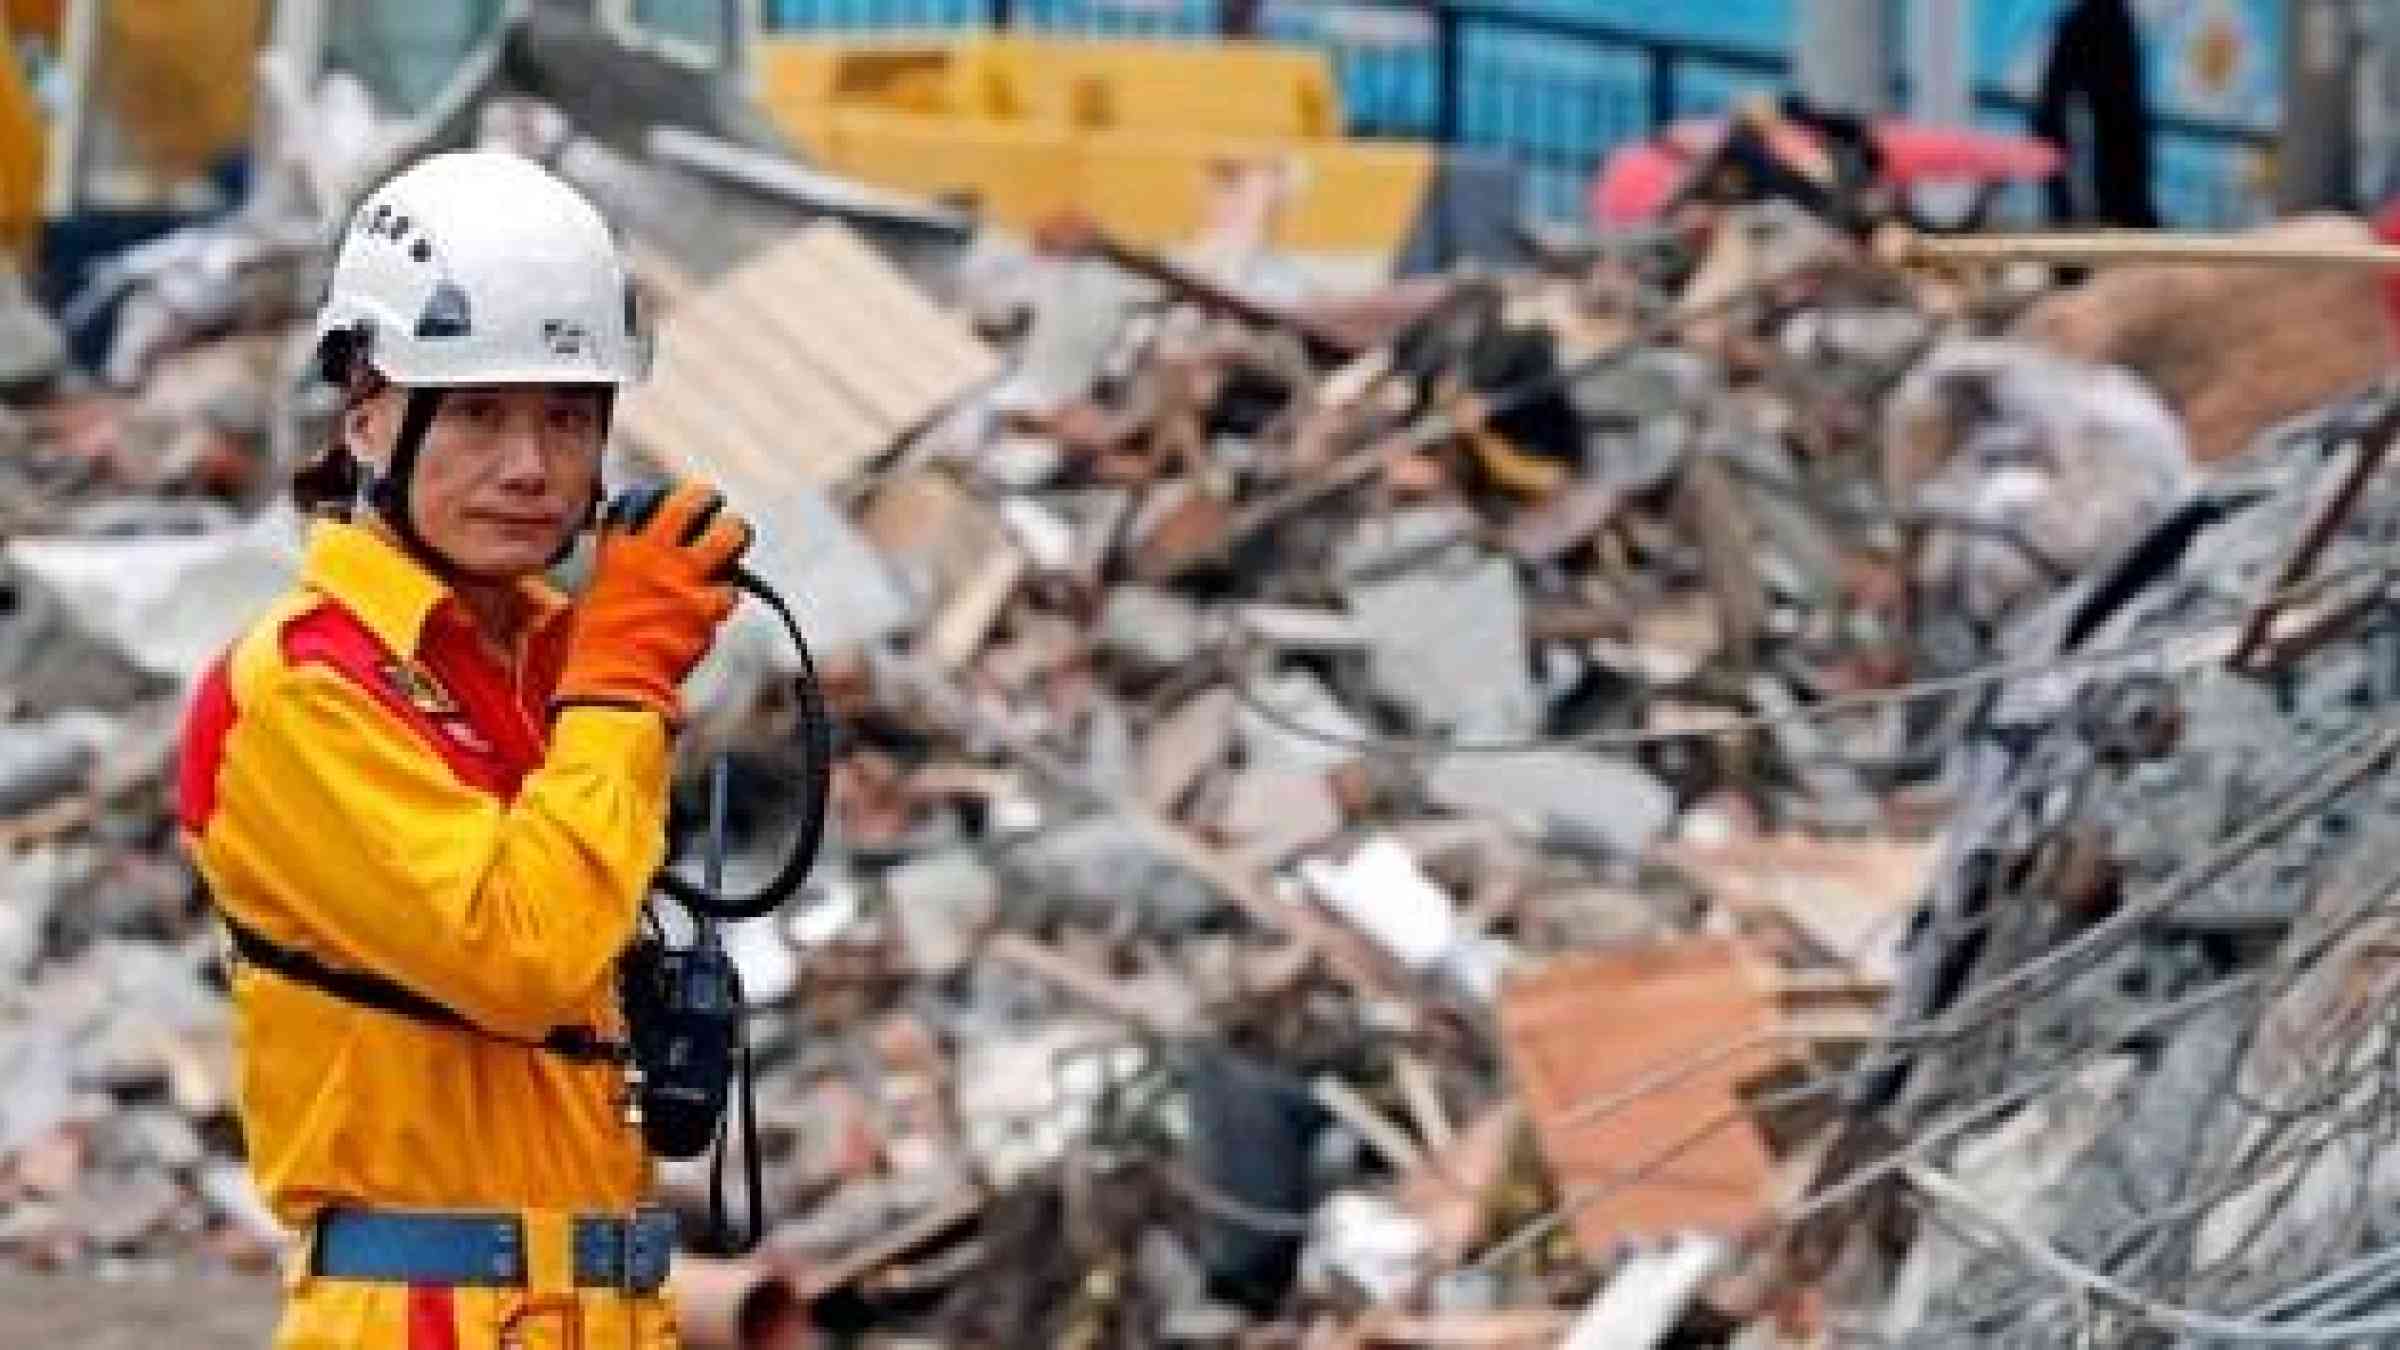 A rescuer speaks on the radio as he searches for survivors at collapsed building after an earthquake hit Hualien in Taiwan, February 8, 2018.